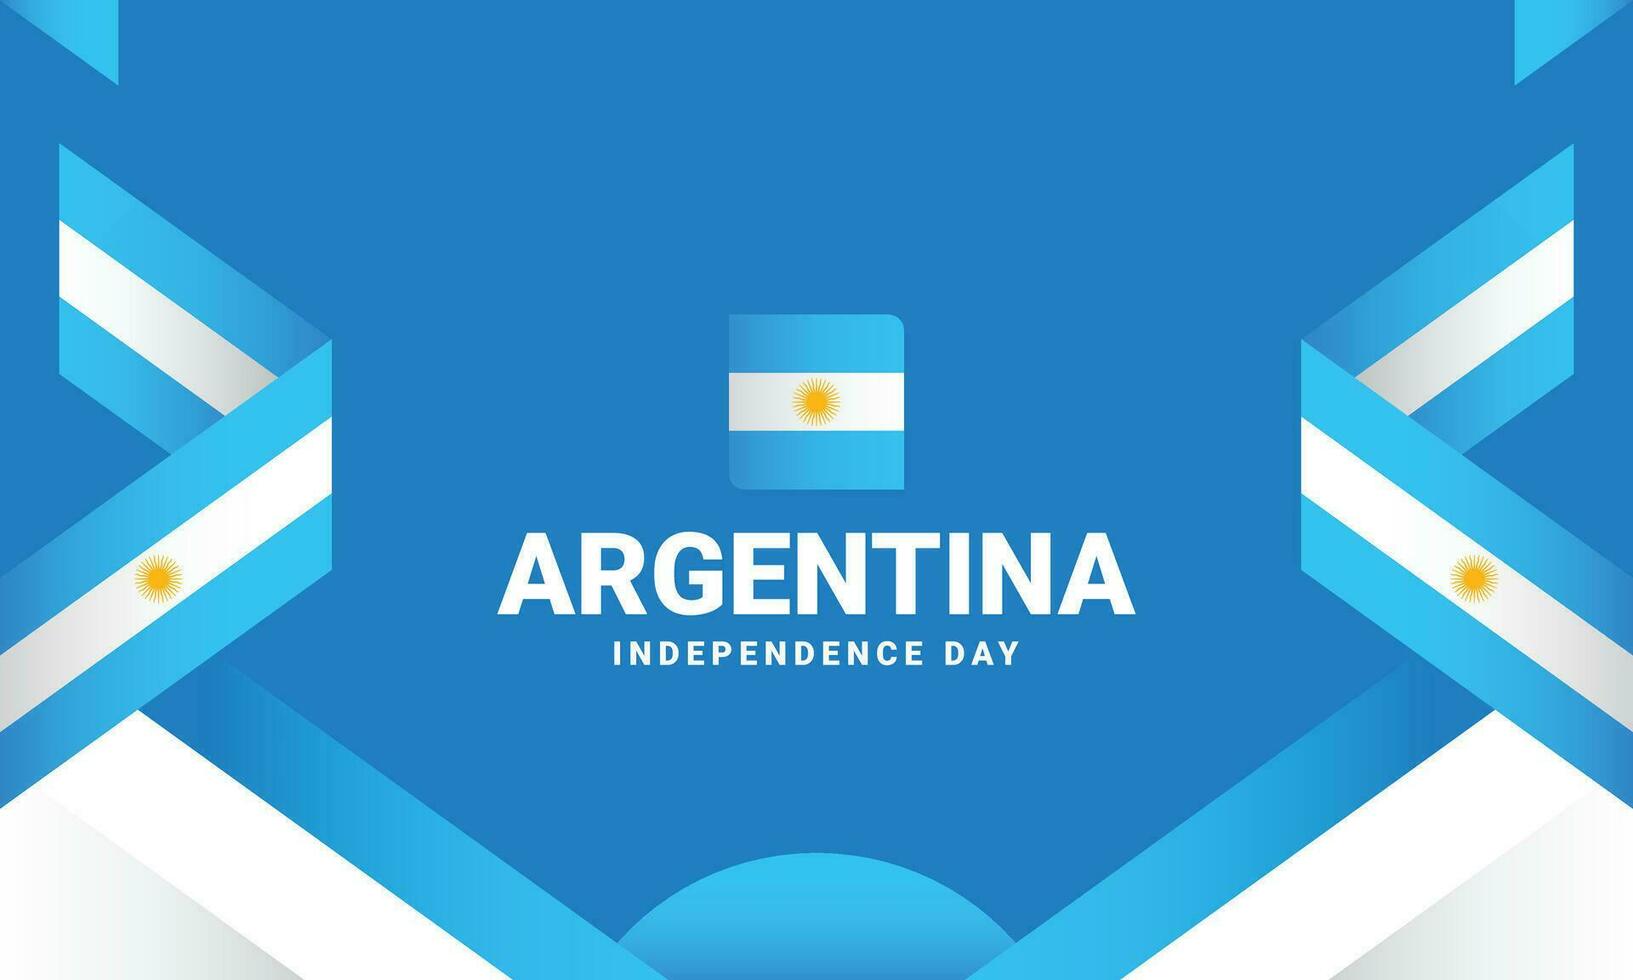 Argentina Independence day event celebrate vector